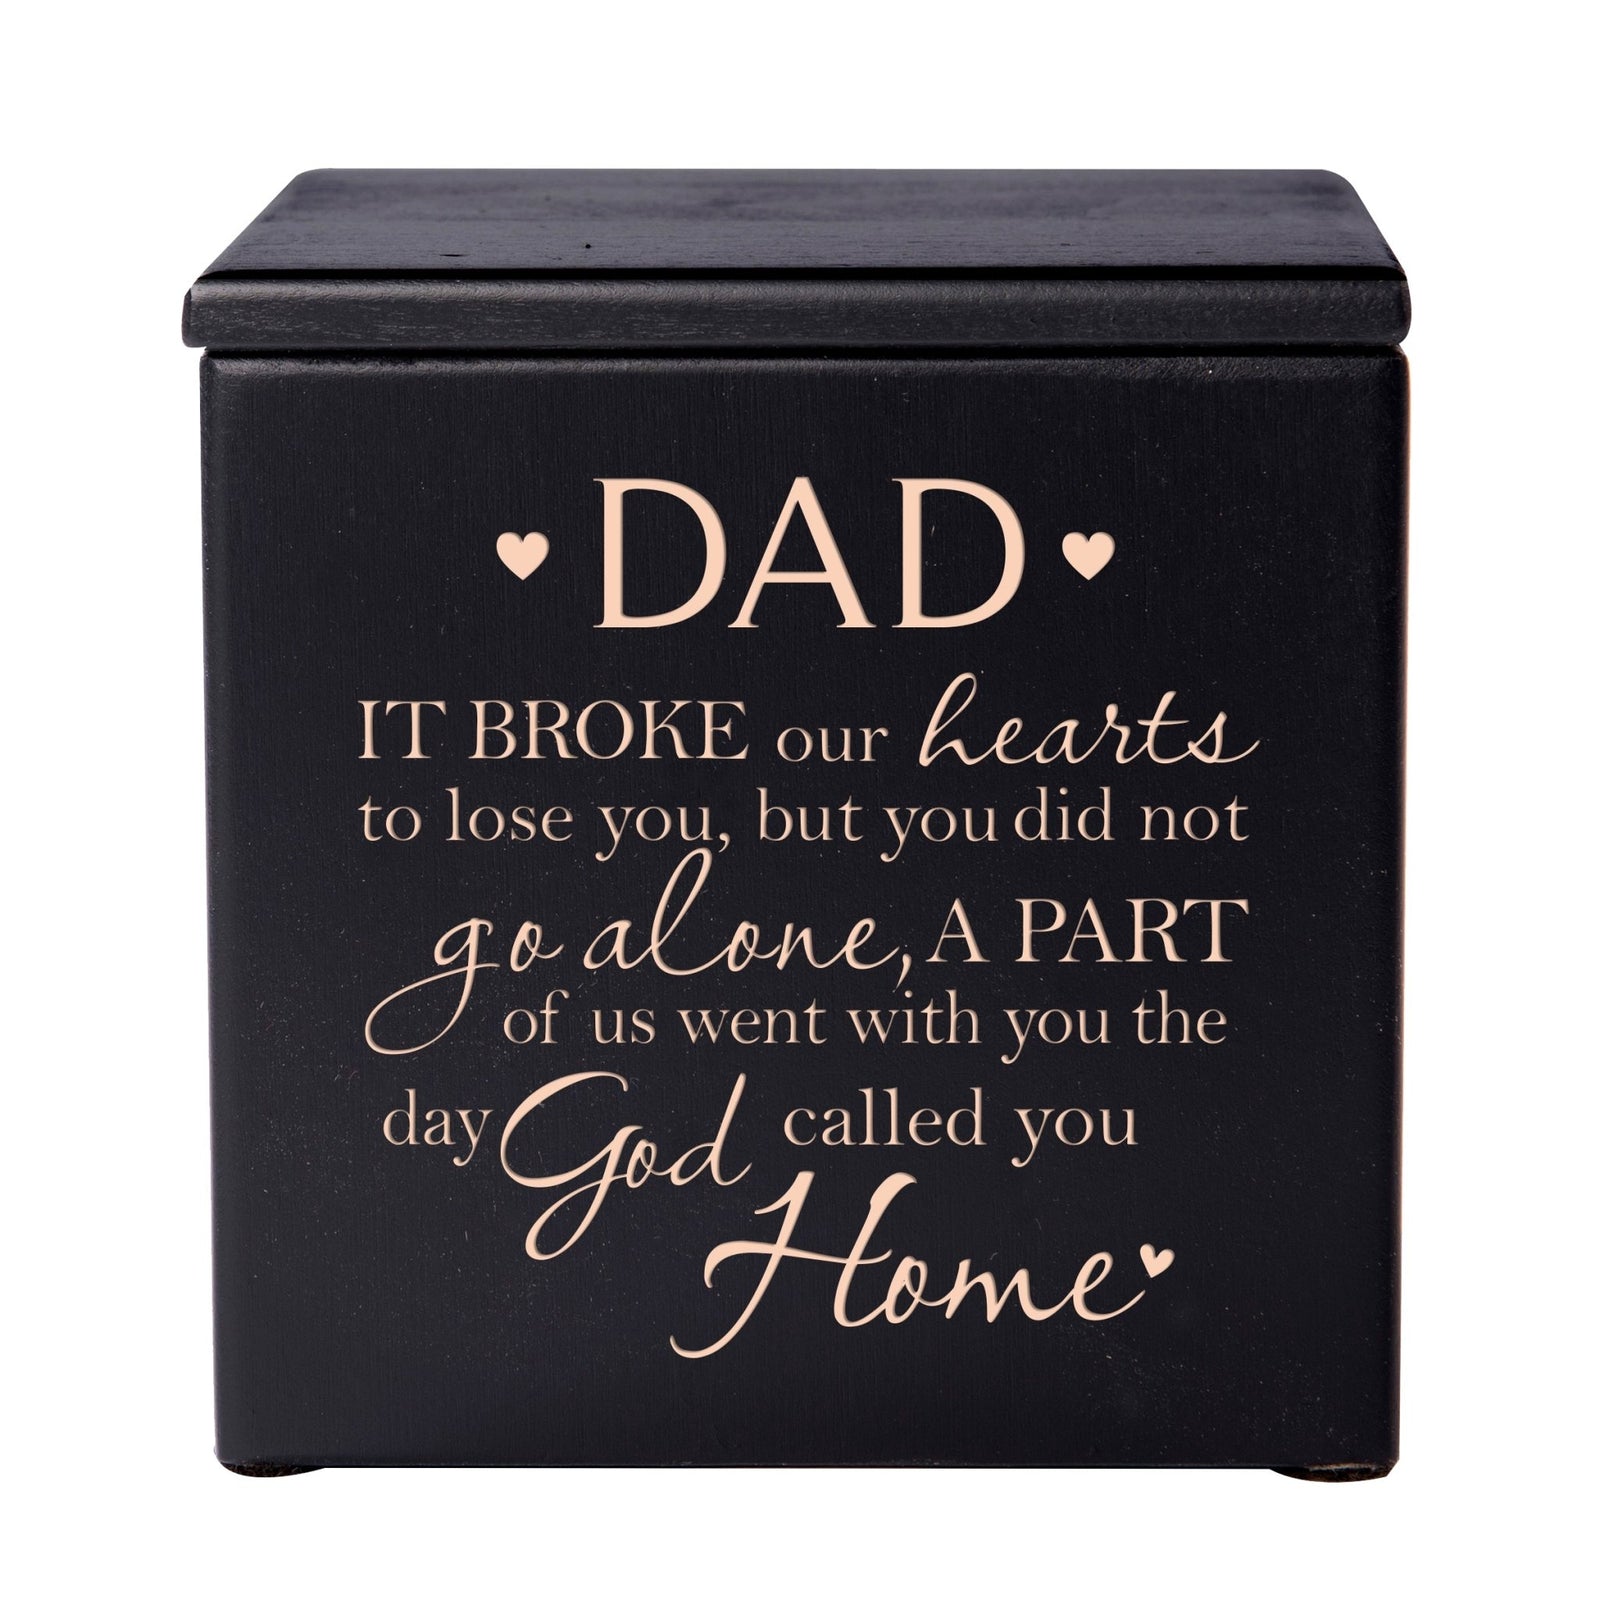 Modern Inspirational Wooden Cremation Urn Box 4.5x4.5in Holds 49 Cu Inches Of Human Ashes (It Broke Our Hearts Dad) Funeral and Commemorative Keepsake - LifeSong Milestones